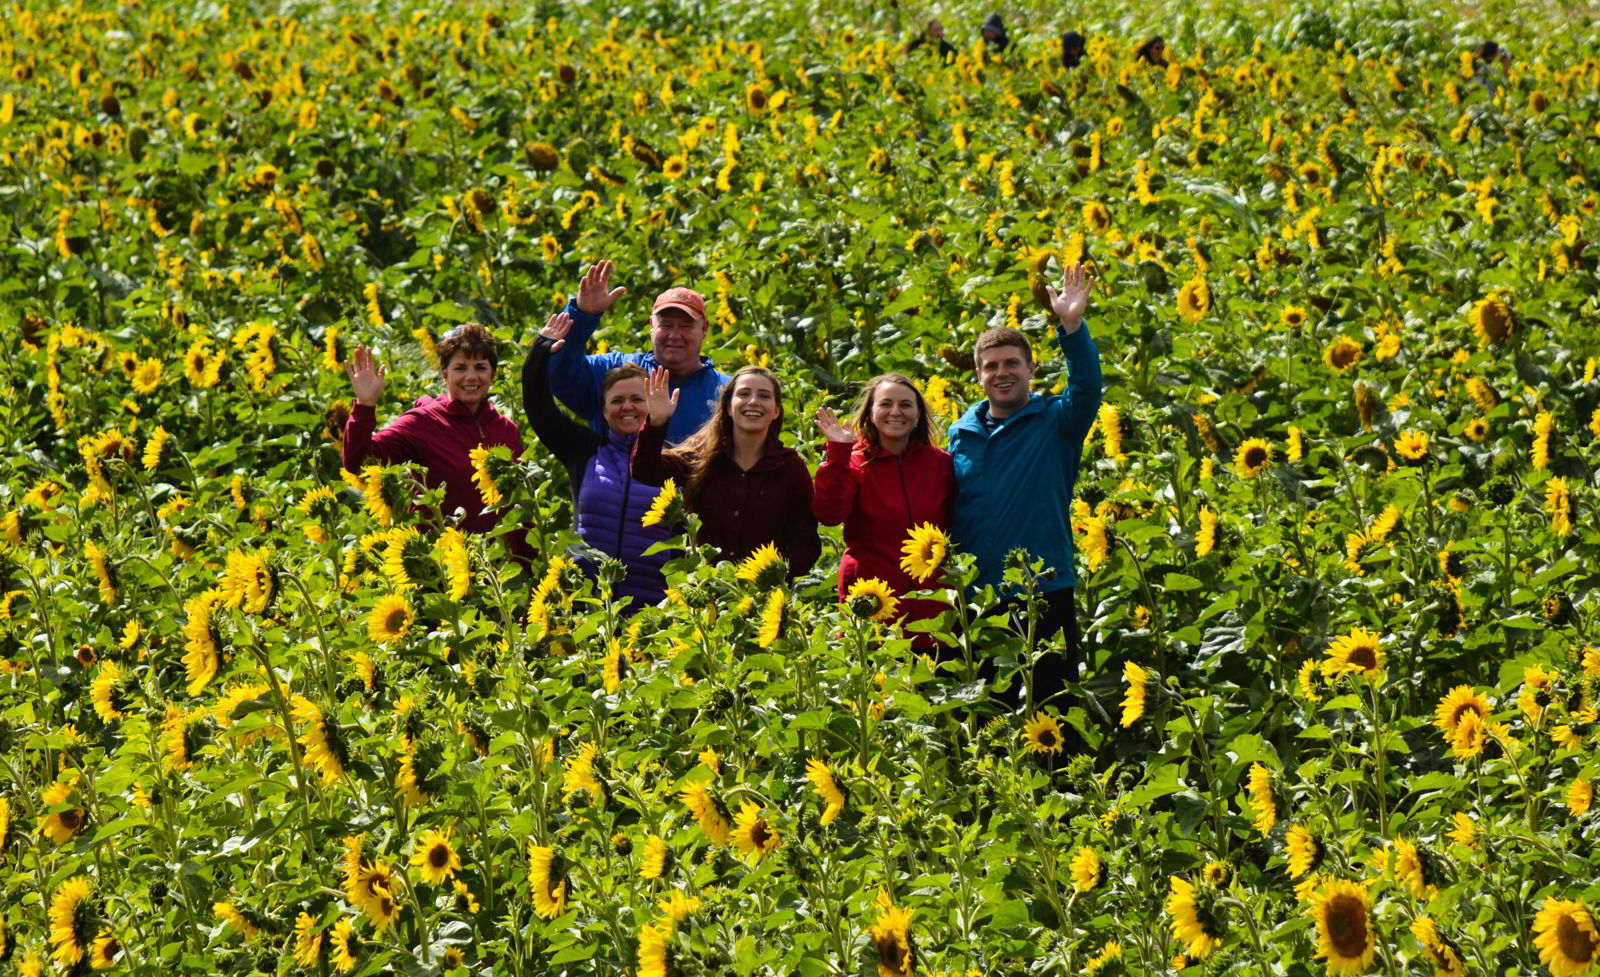 An image of a group of people in a sunflower field at Bowden Sunmaze in Alberta, Canada.